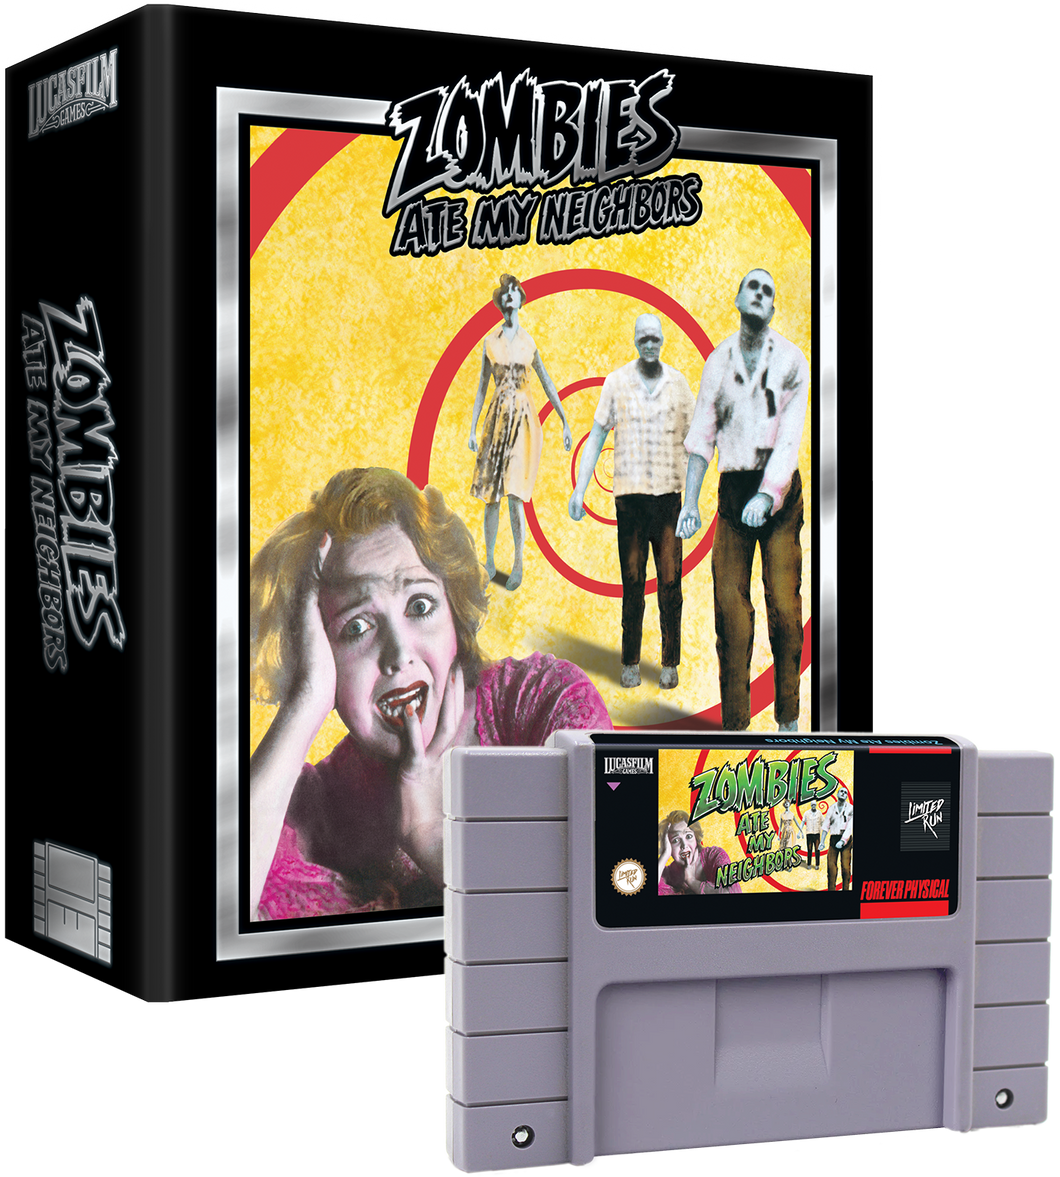 Zombies Ate My Neighbors Premium Edition (Grey or Green)  - SNES